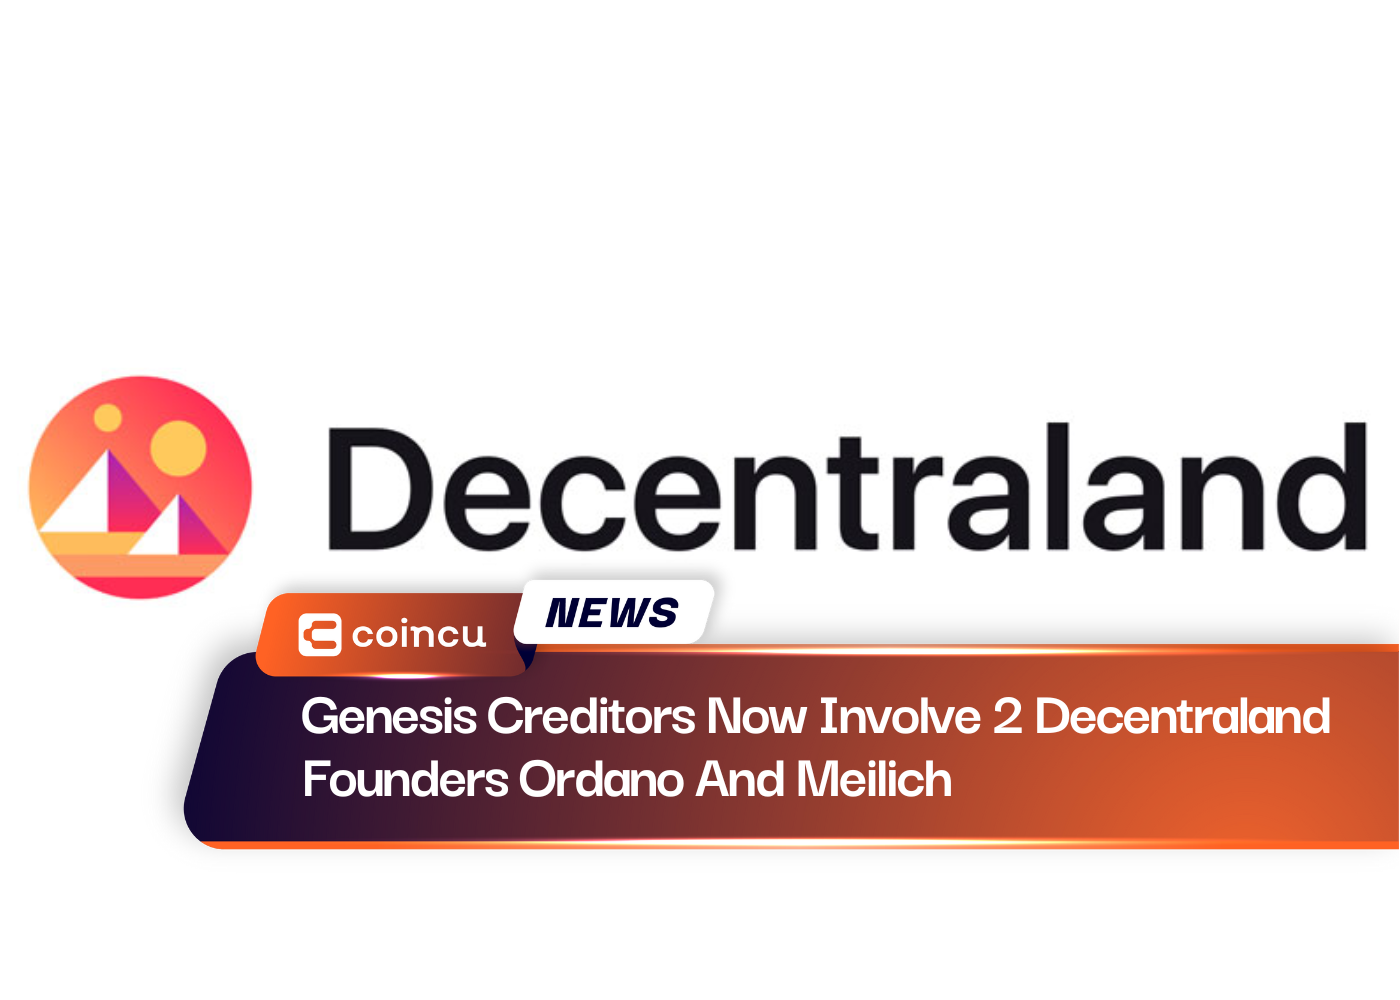 Genesis Creditors Now Involve 2 Decentraland Founders Ordano And Meilich